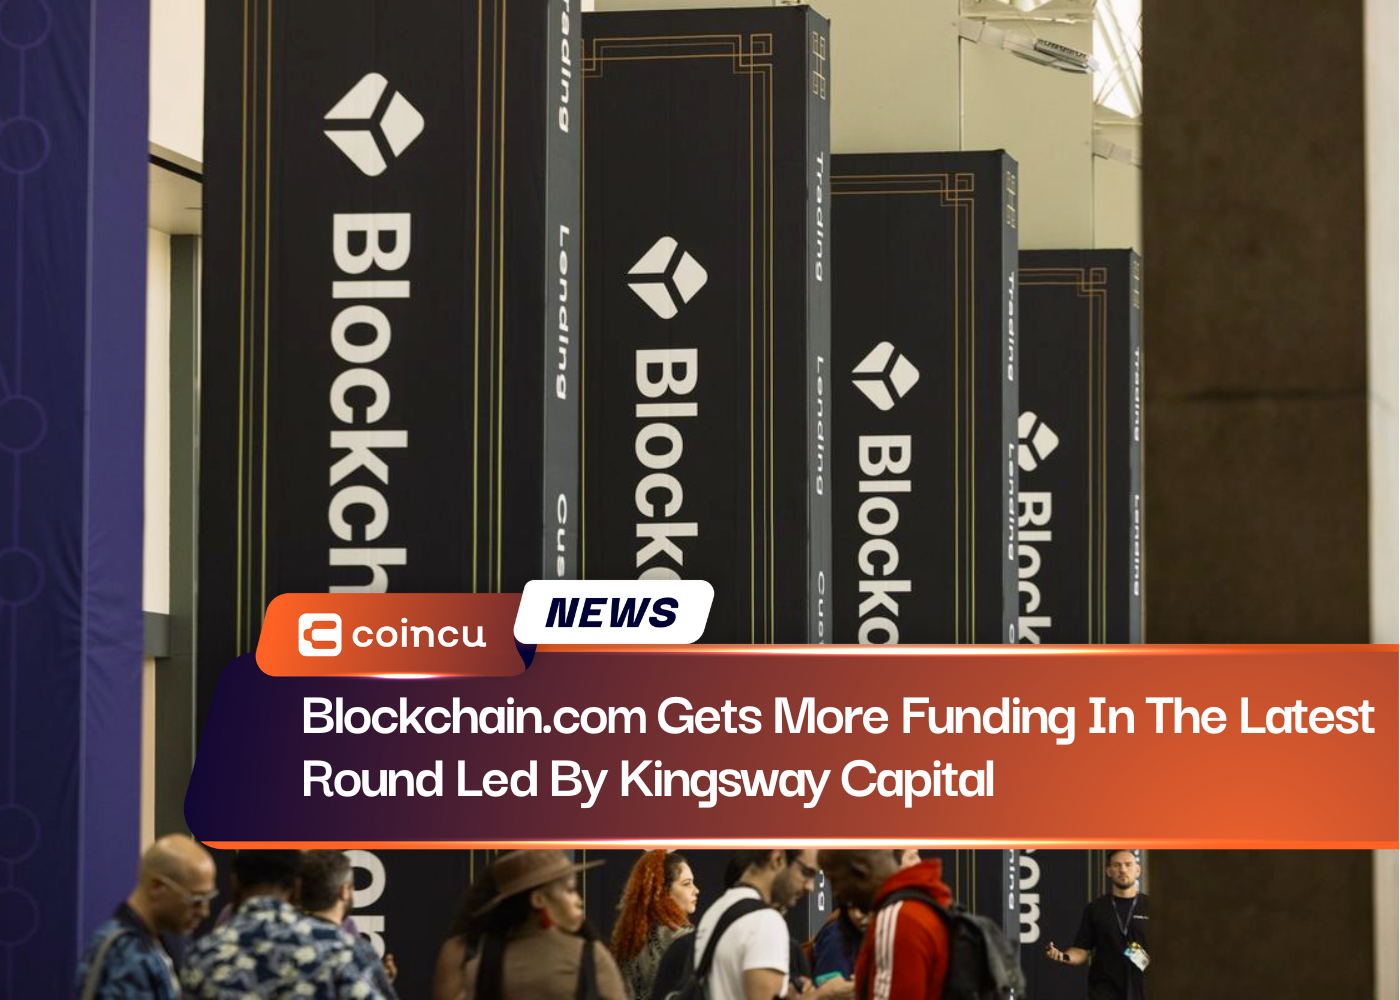 Blockchain.com Gets More Funding In The Latest Round Led By Kingsway Capital